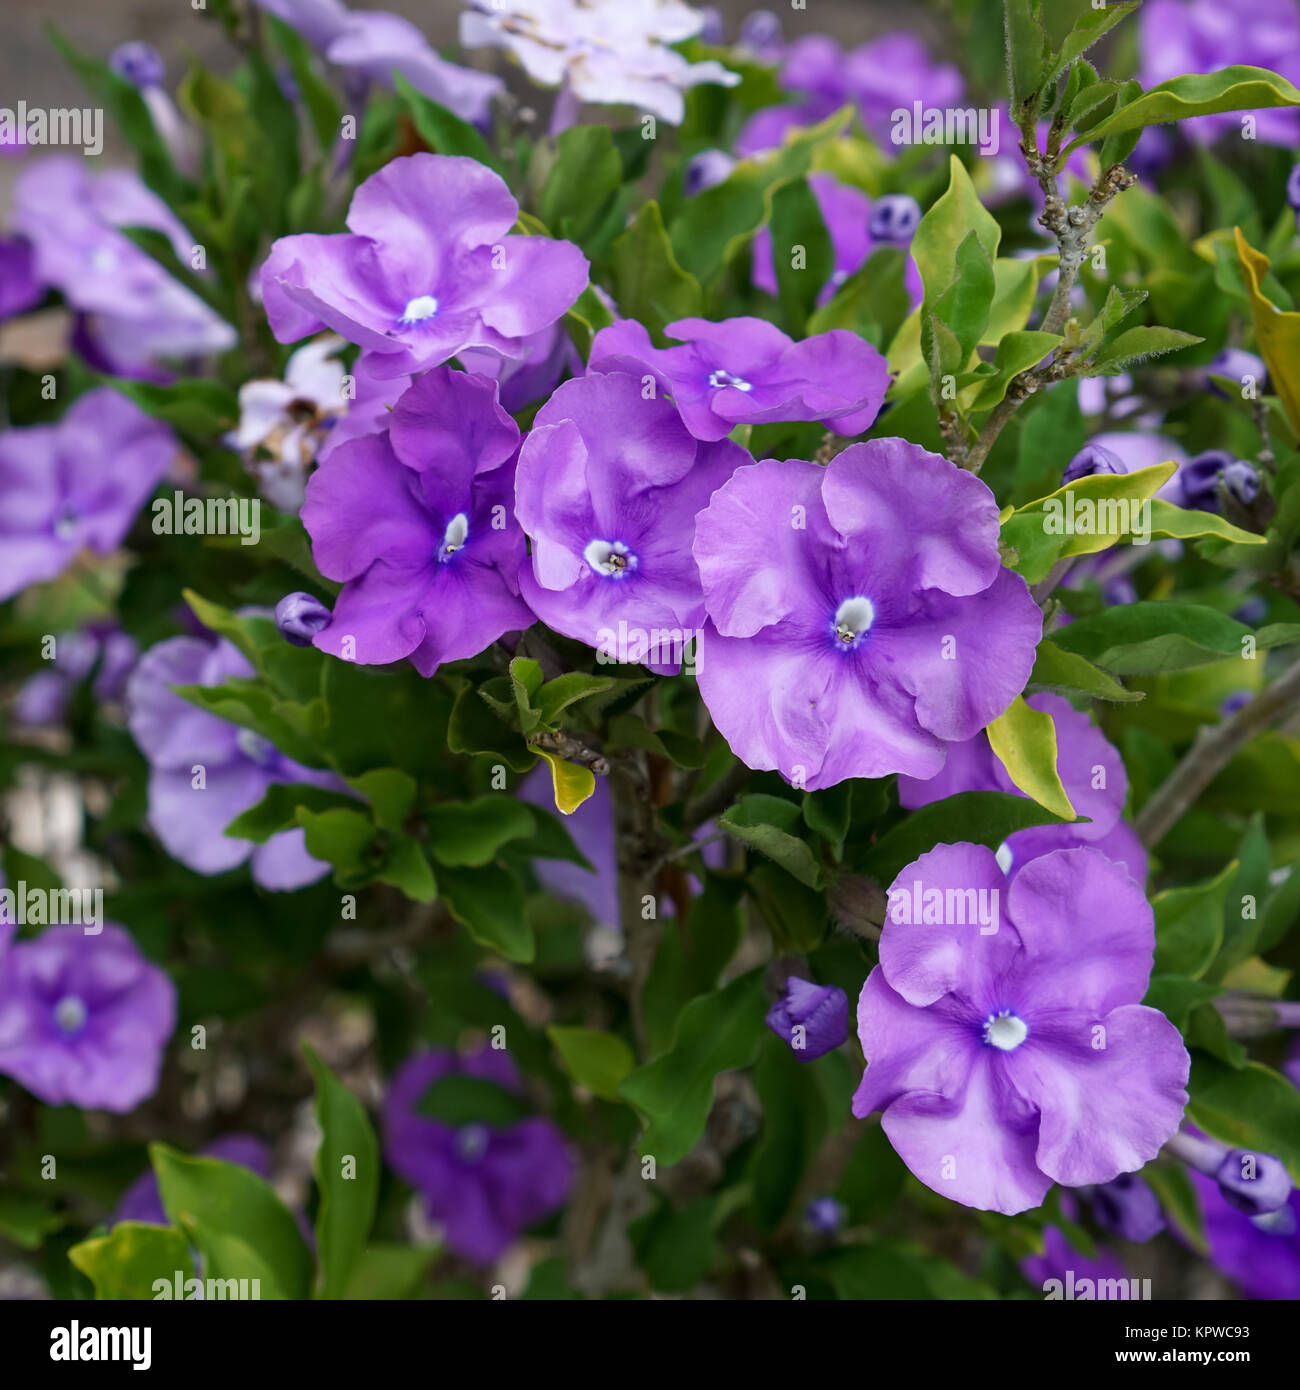 Bright mauve Brunfelsia flowers, on the plant, surrounded by leaves. Stock Photo